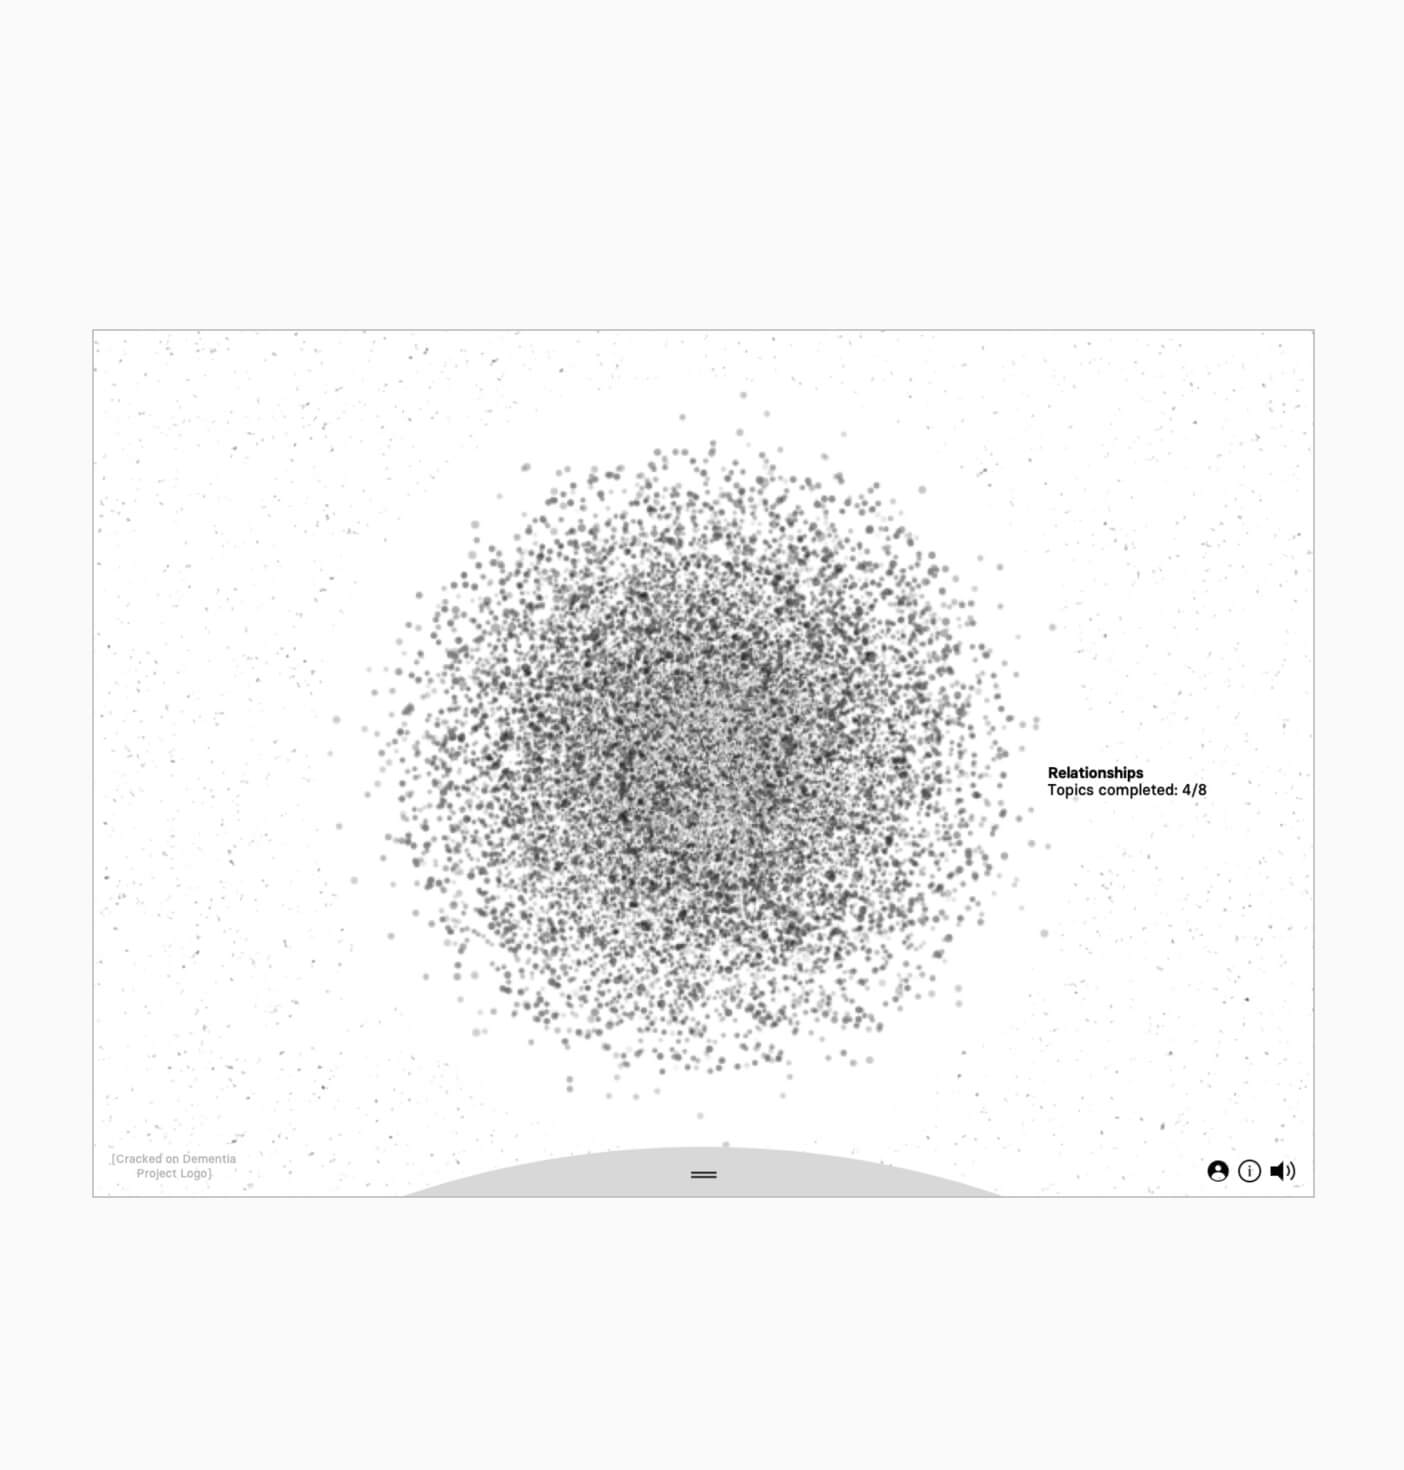 a sketch exploring the theme of murmuration, or clusters of meaning